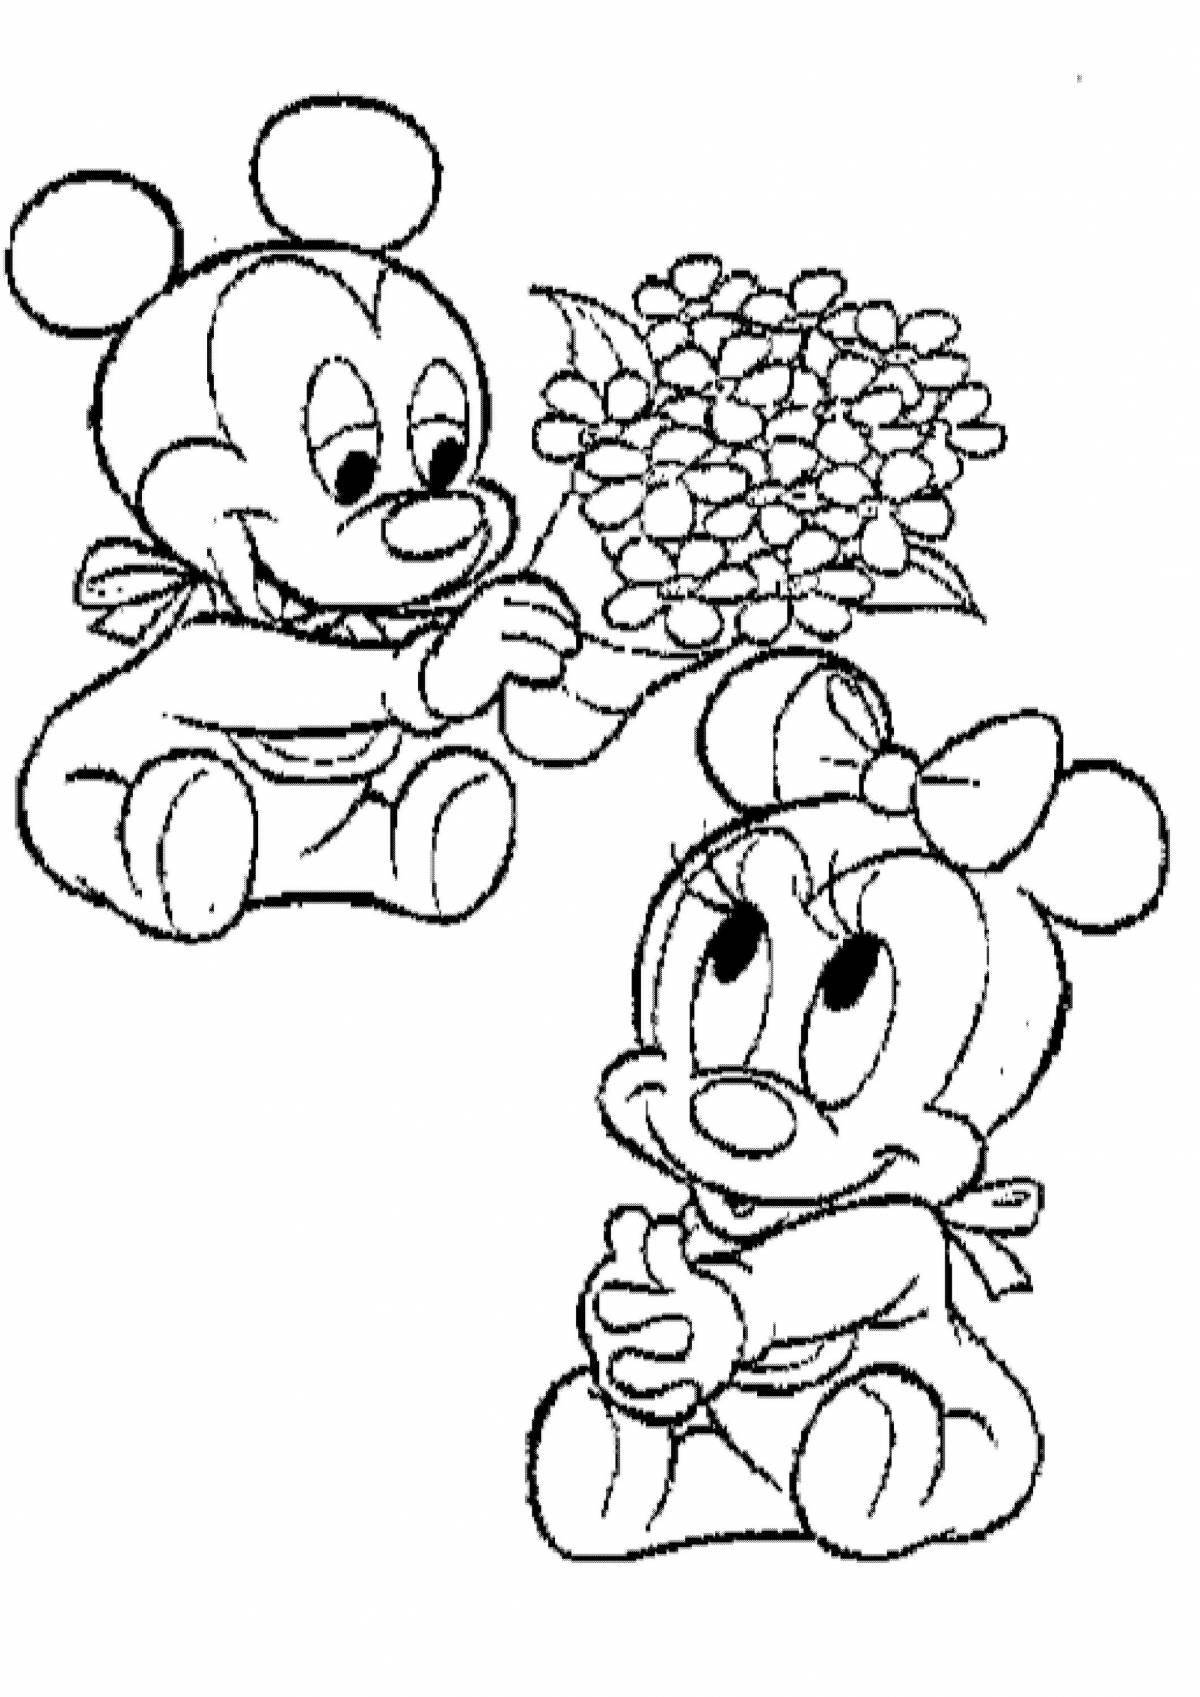 Minnie mouse wonderful coloring book for kids